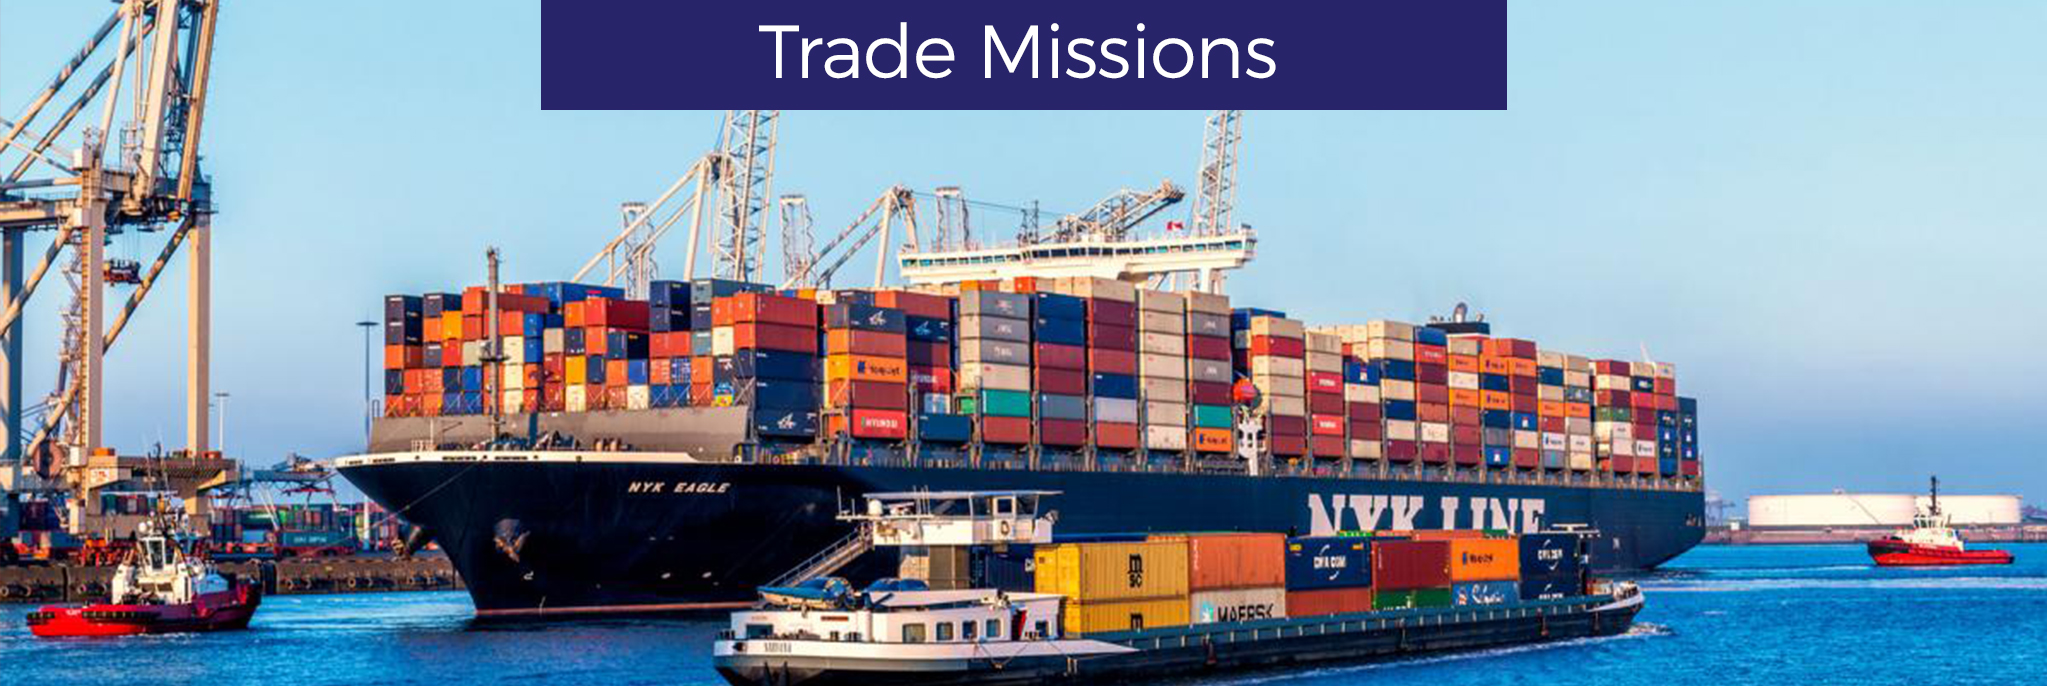 trade_missions_bn